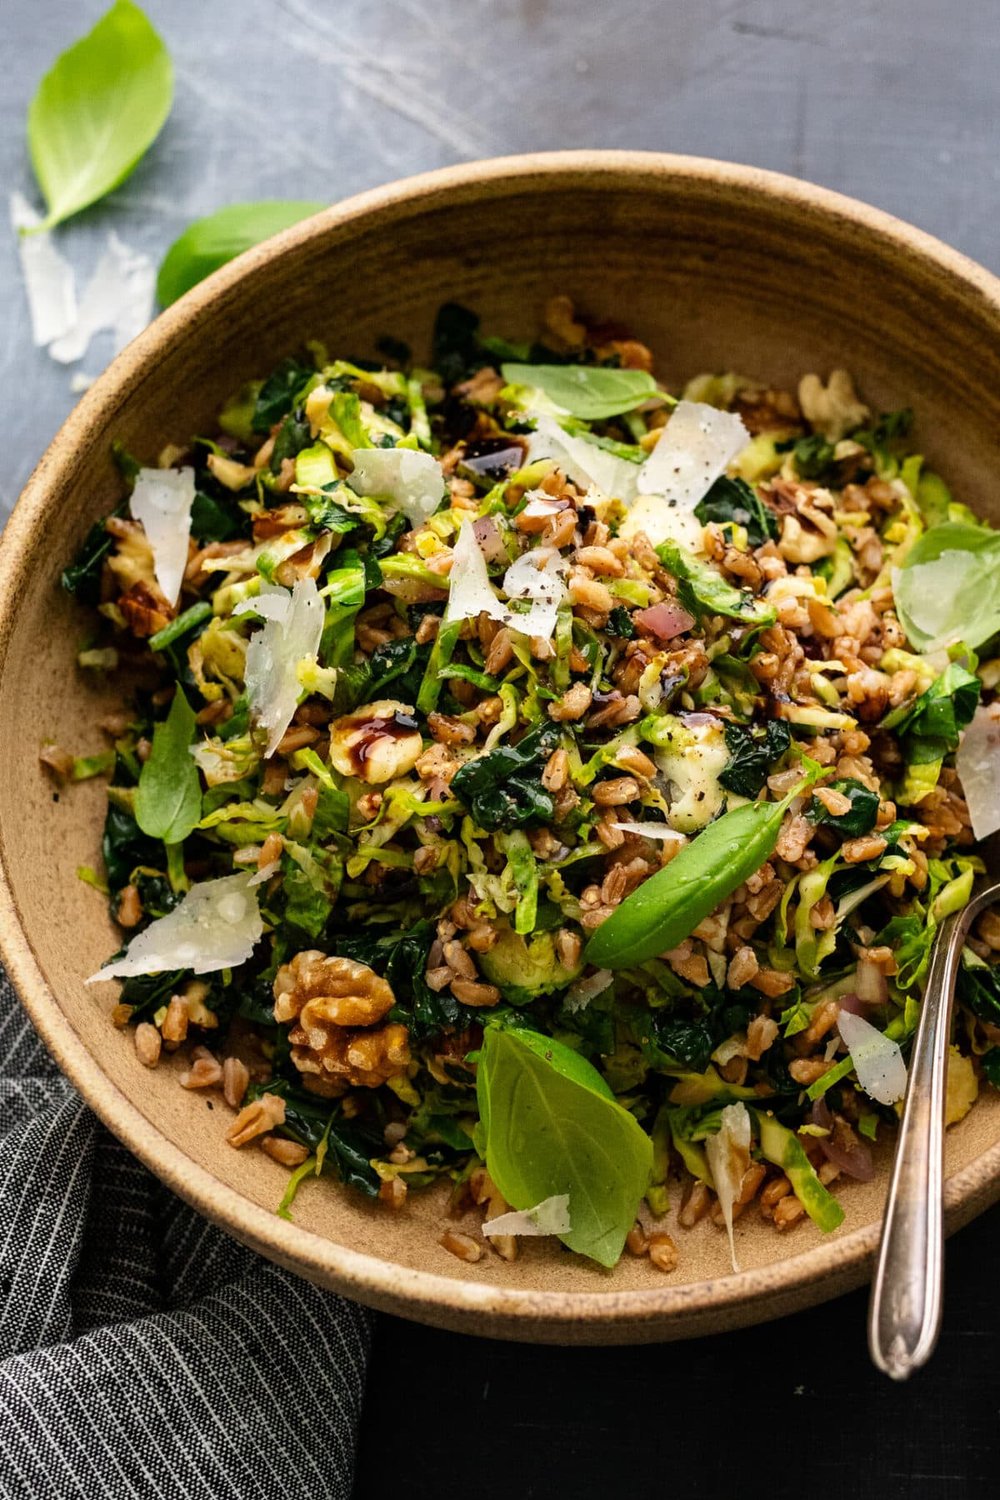 Warm Kale and Brussel Sprout Salad with Farro